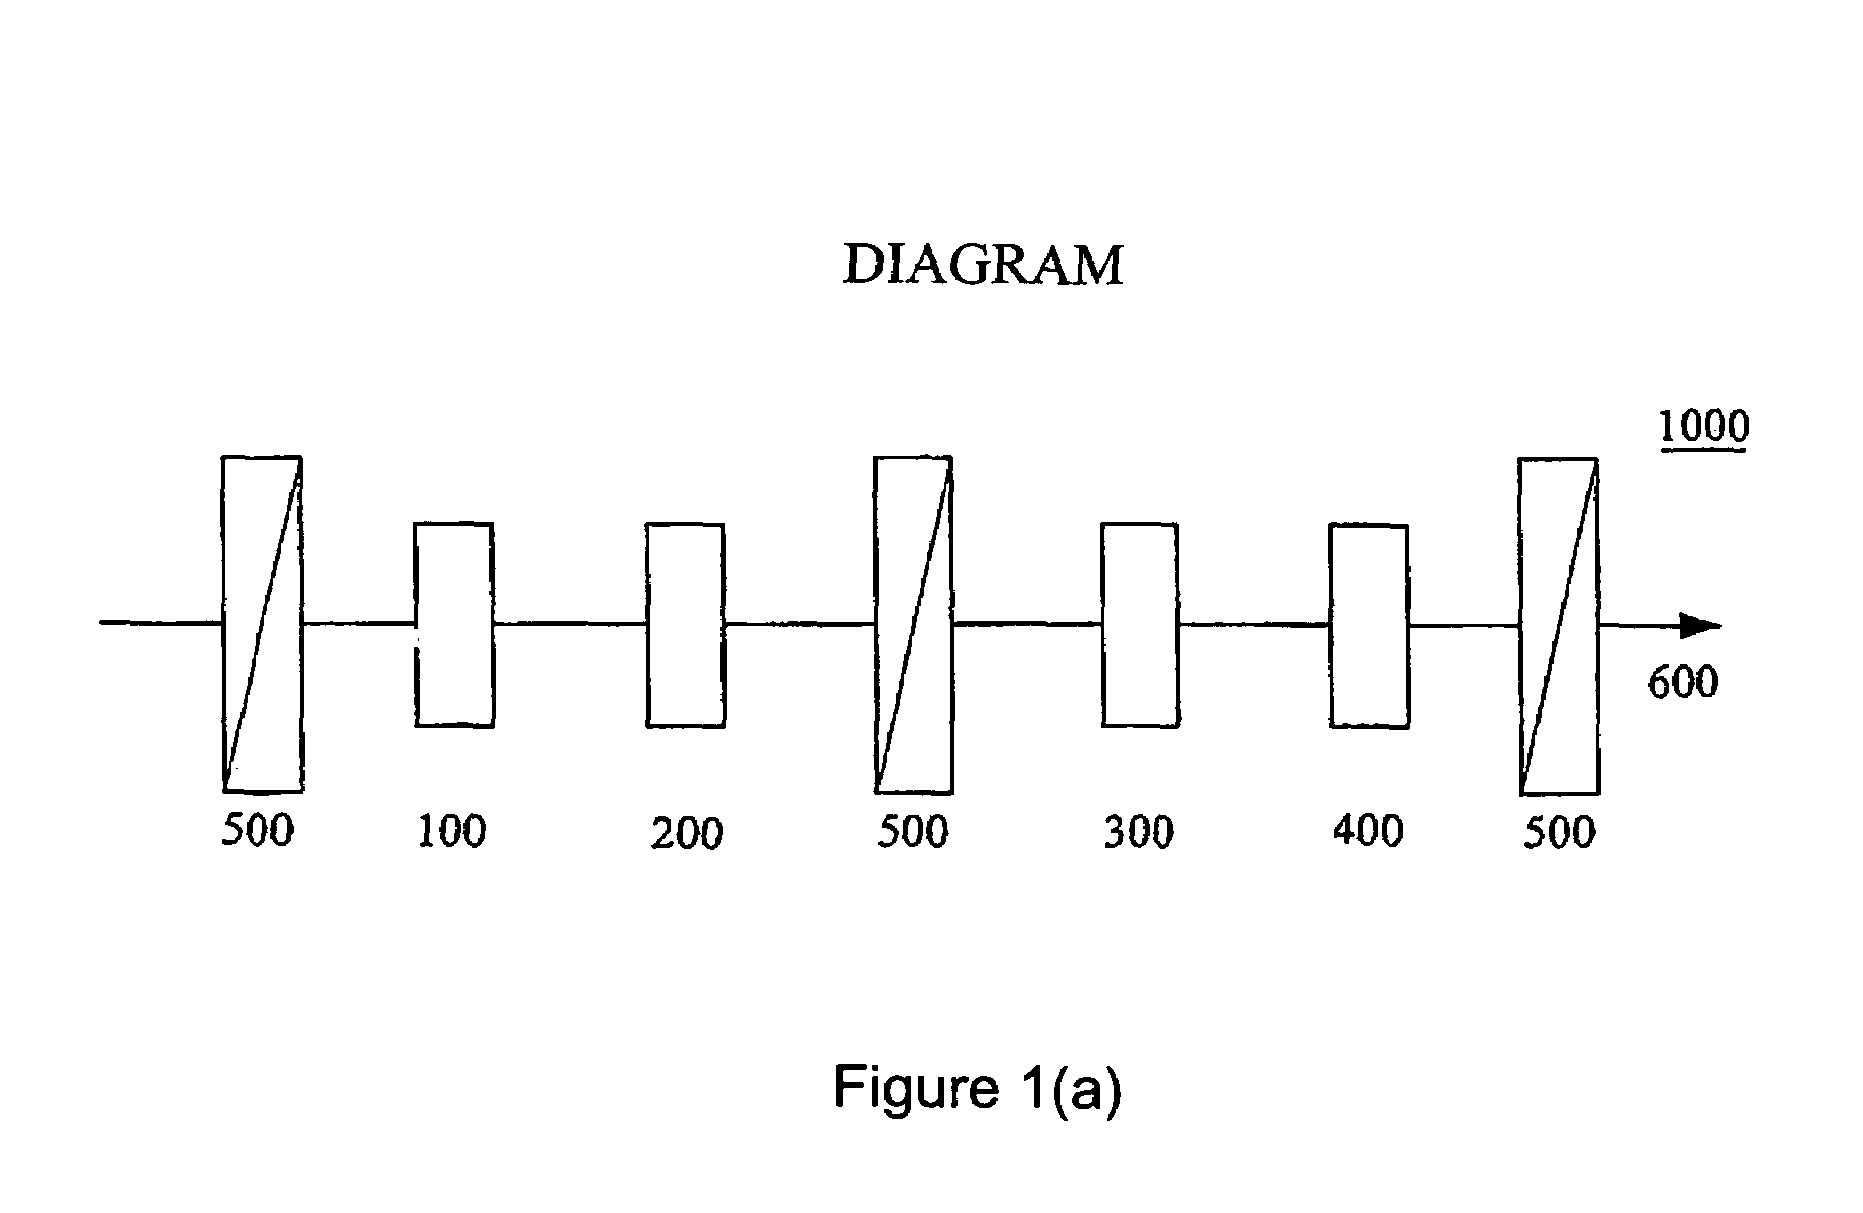 Tunable terahertz wavelength selector device using magnetically controlled birefringence of liquid crystals